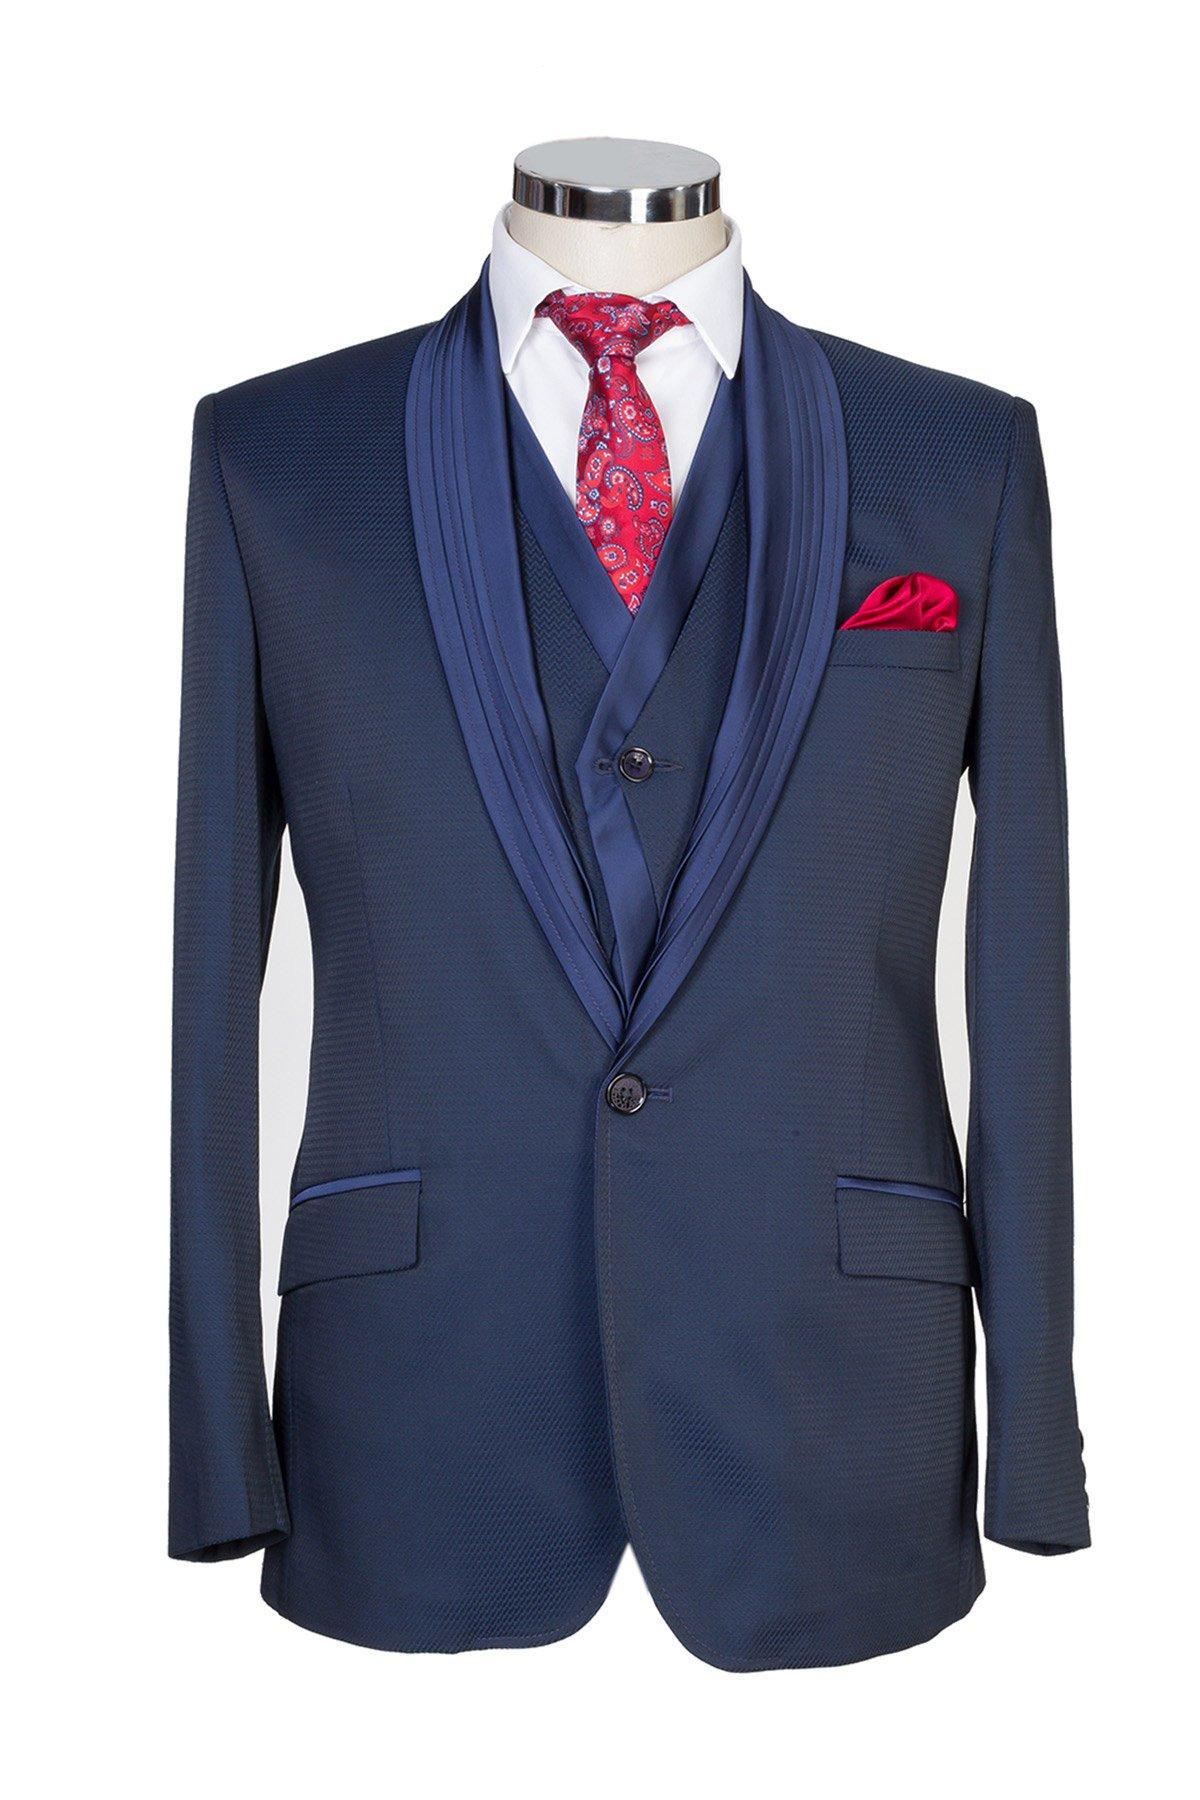 Blue Colored Textured Finish Ready Made Suit